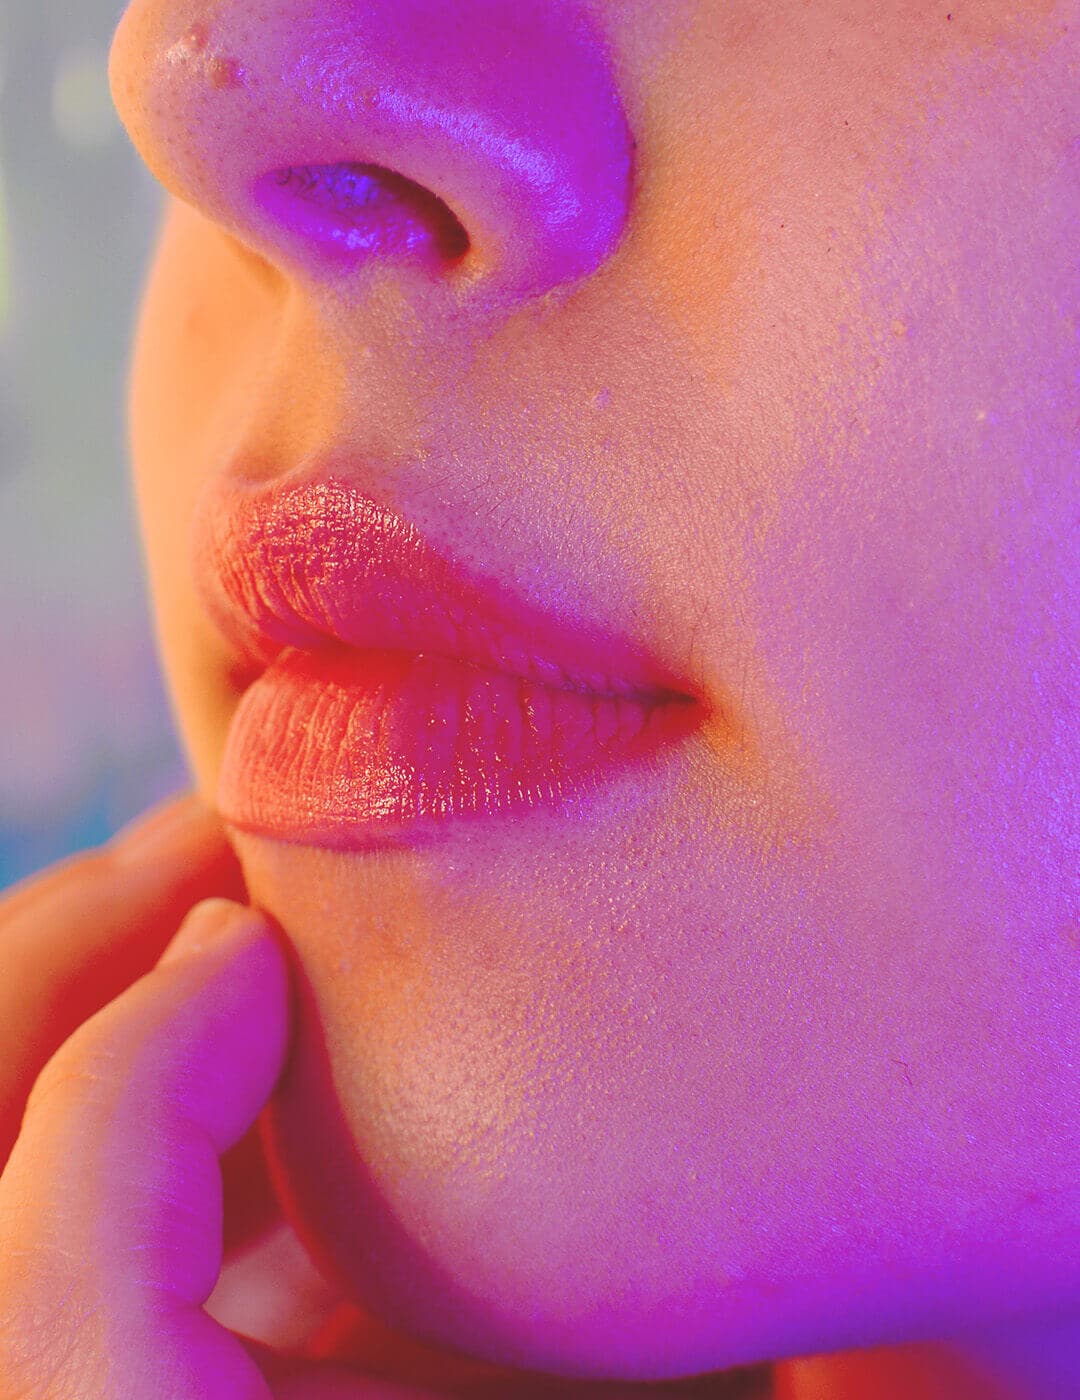 A close-up image of a woman's rosy lips while she undergoes a snow mushroom skincare routine, enhancing the radiance of her clear skin